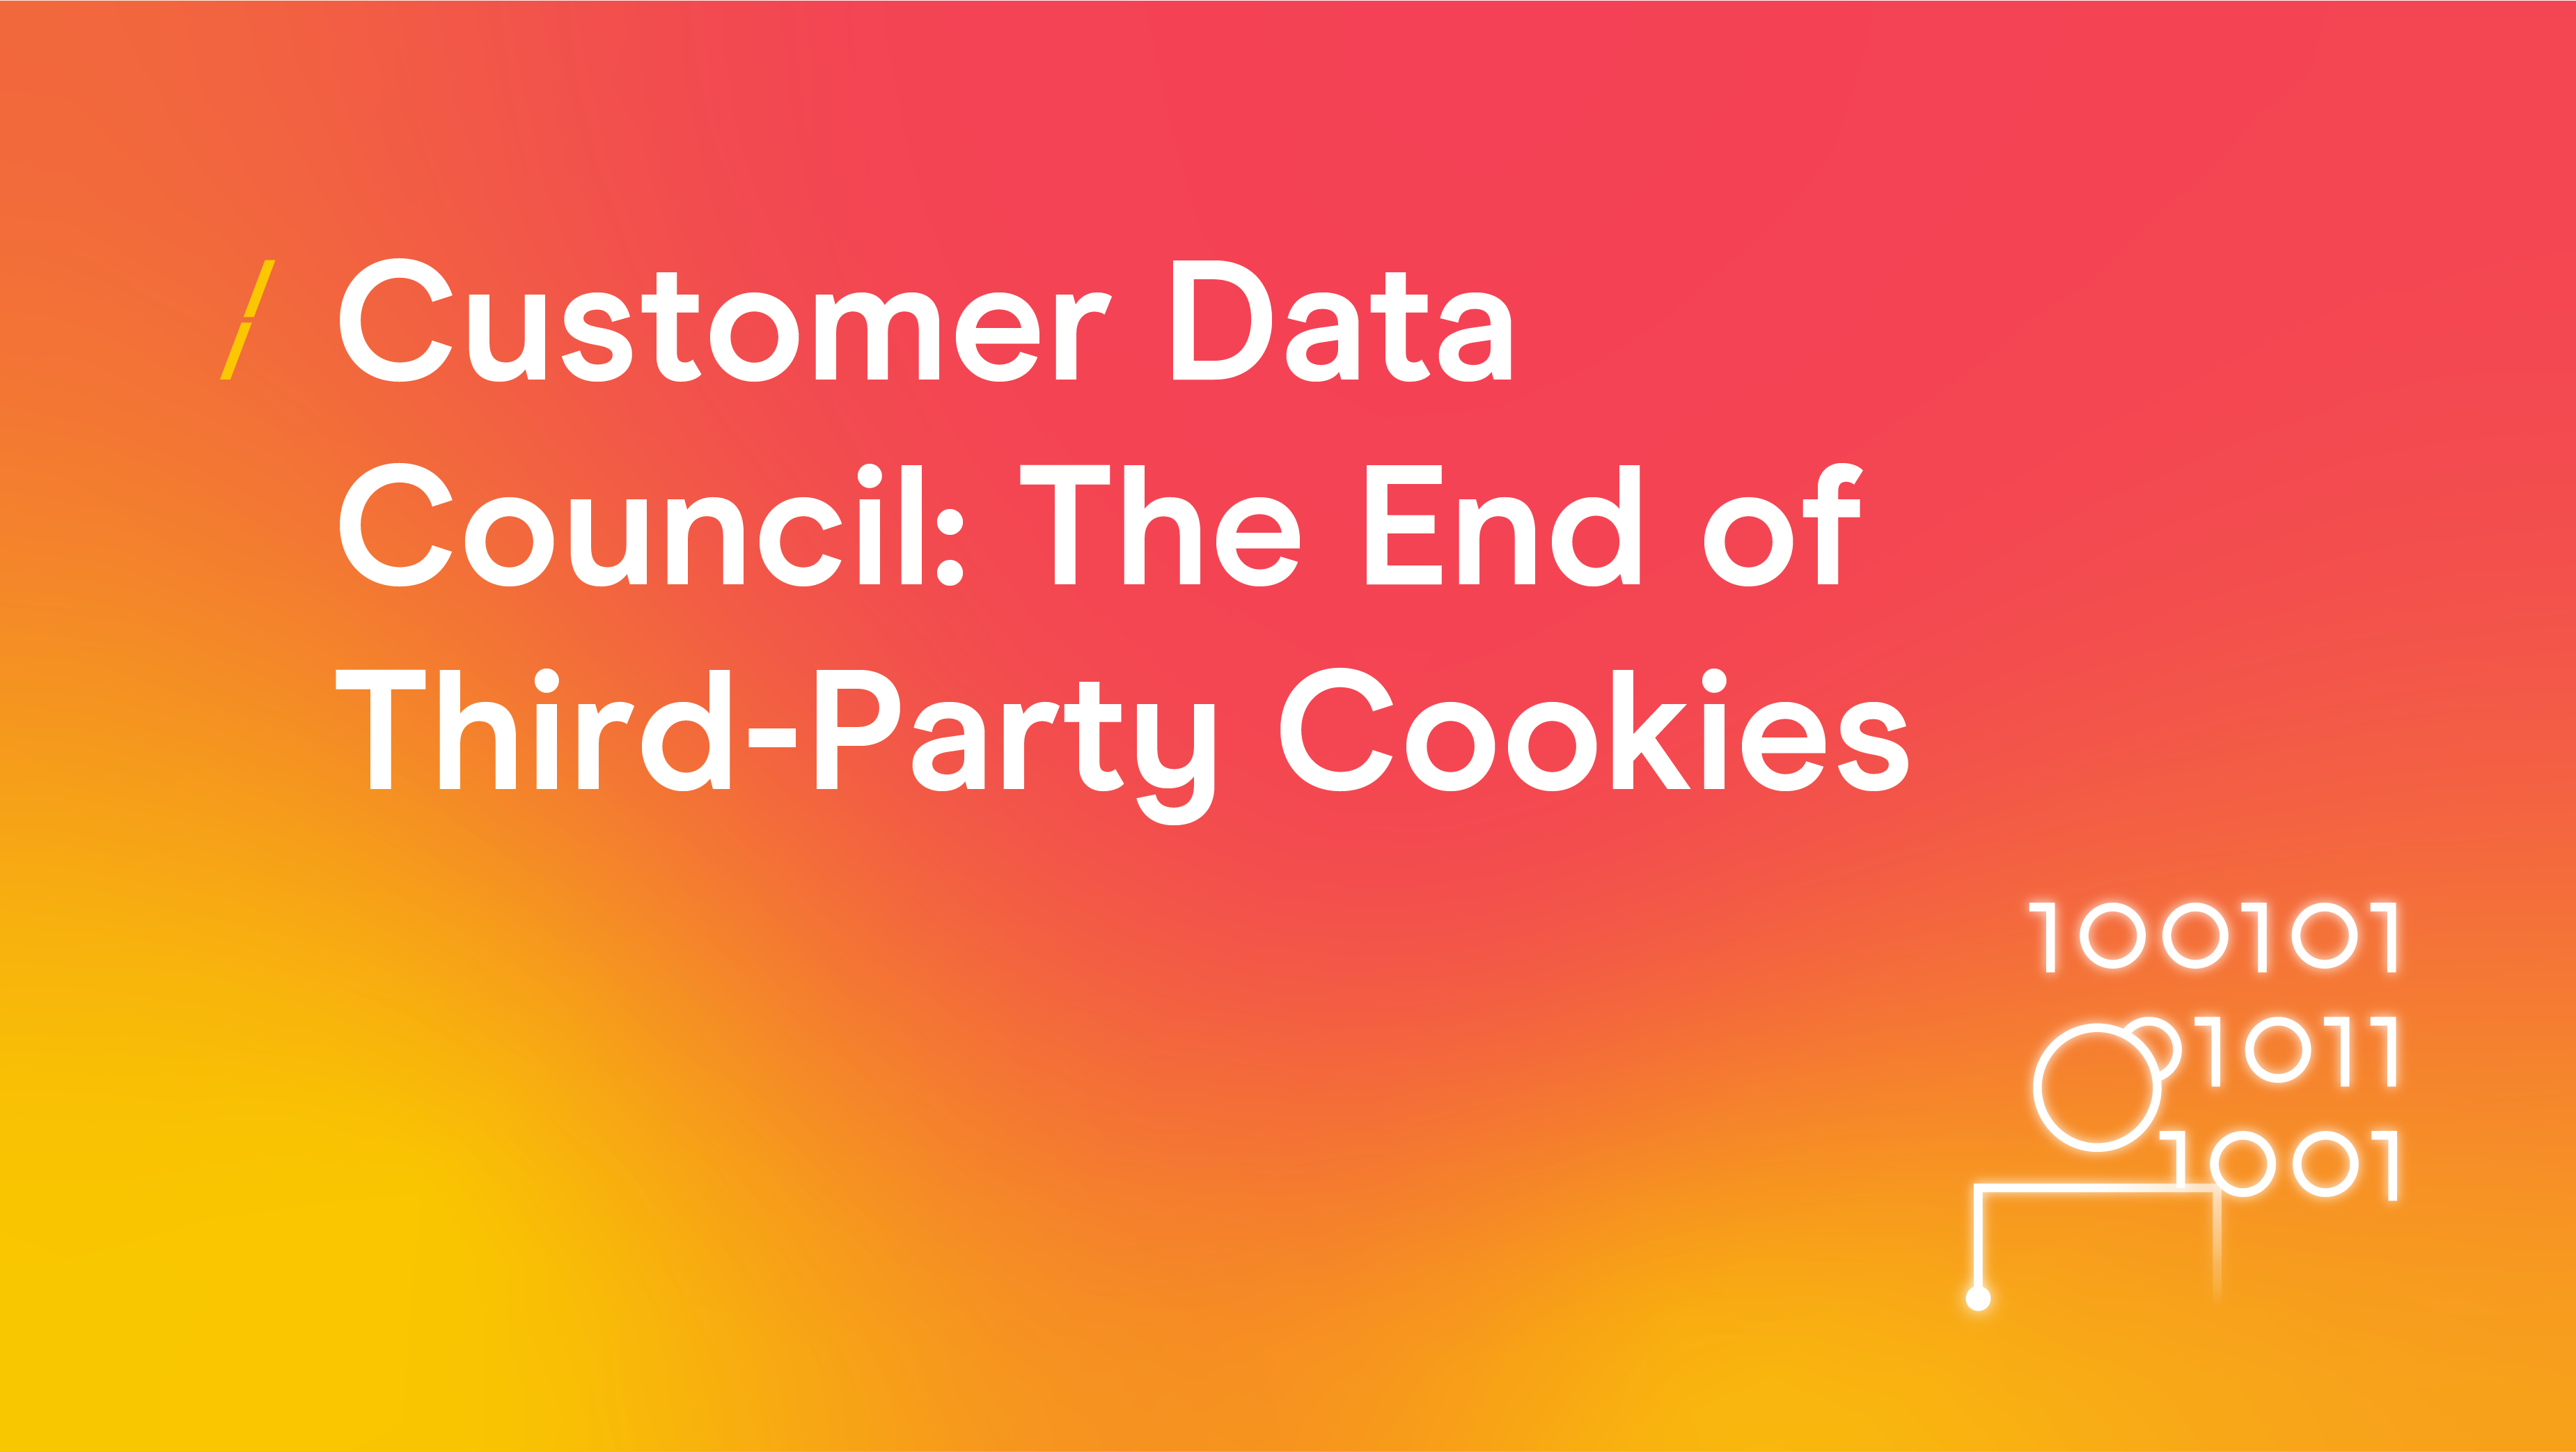 Customer Data Council- The End of Third-Party Cookies_Research articles copy 7_Research articles copy 7.png